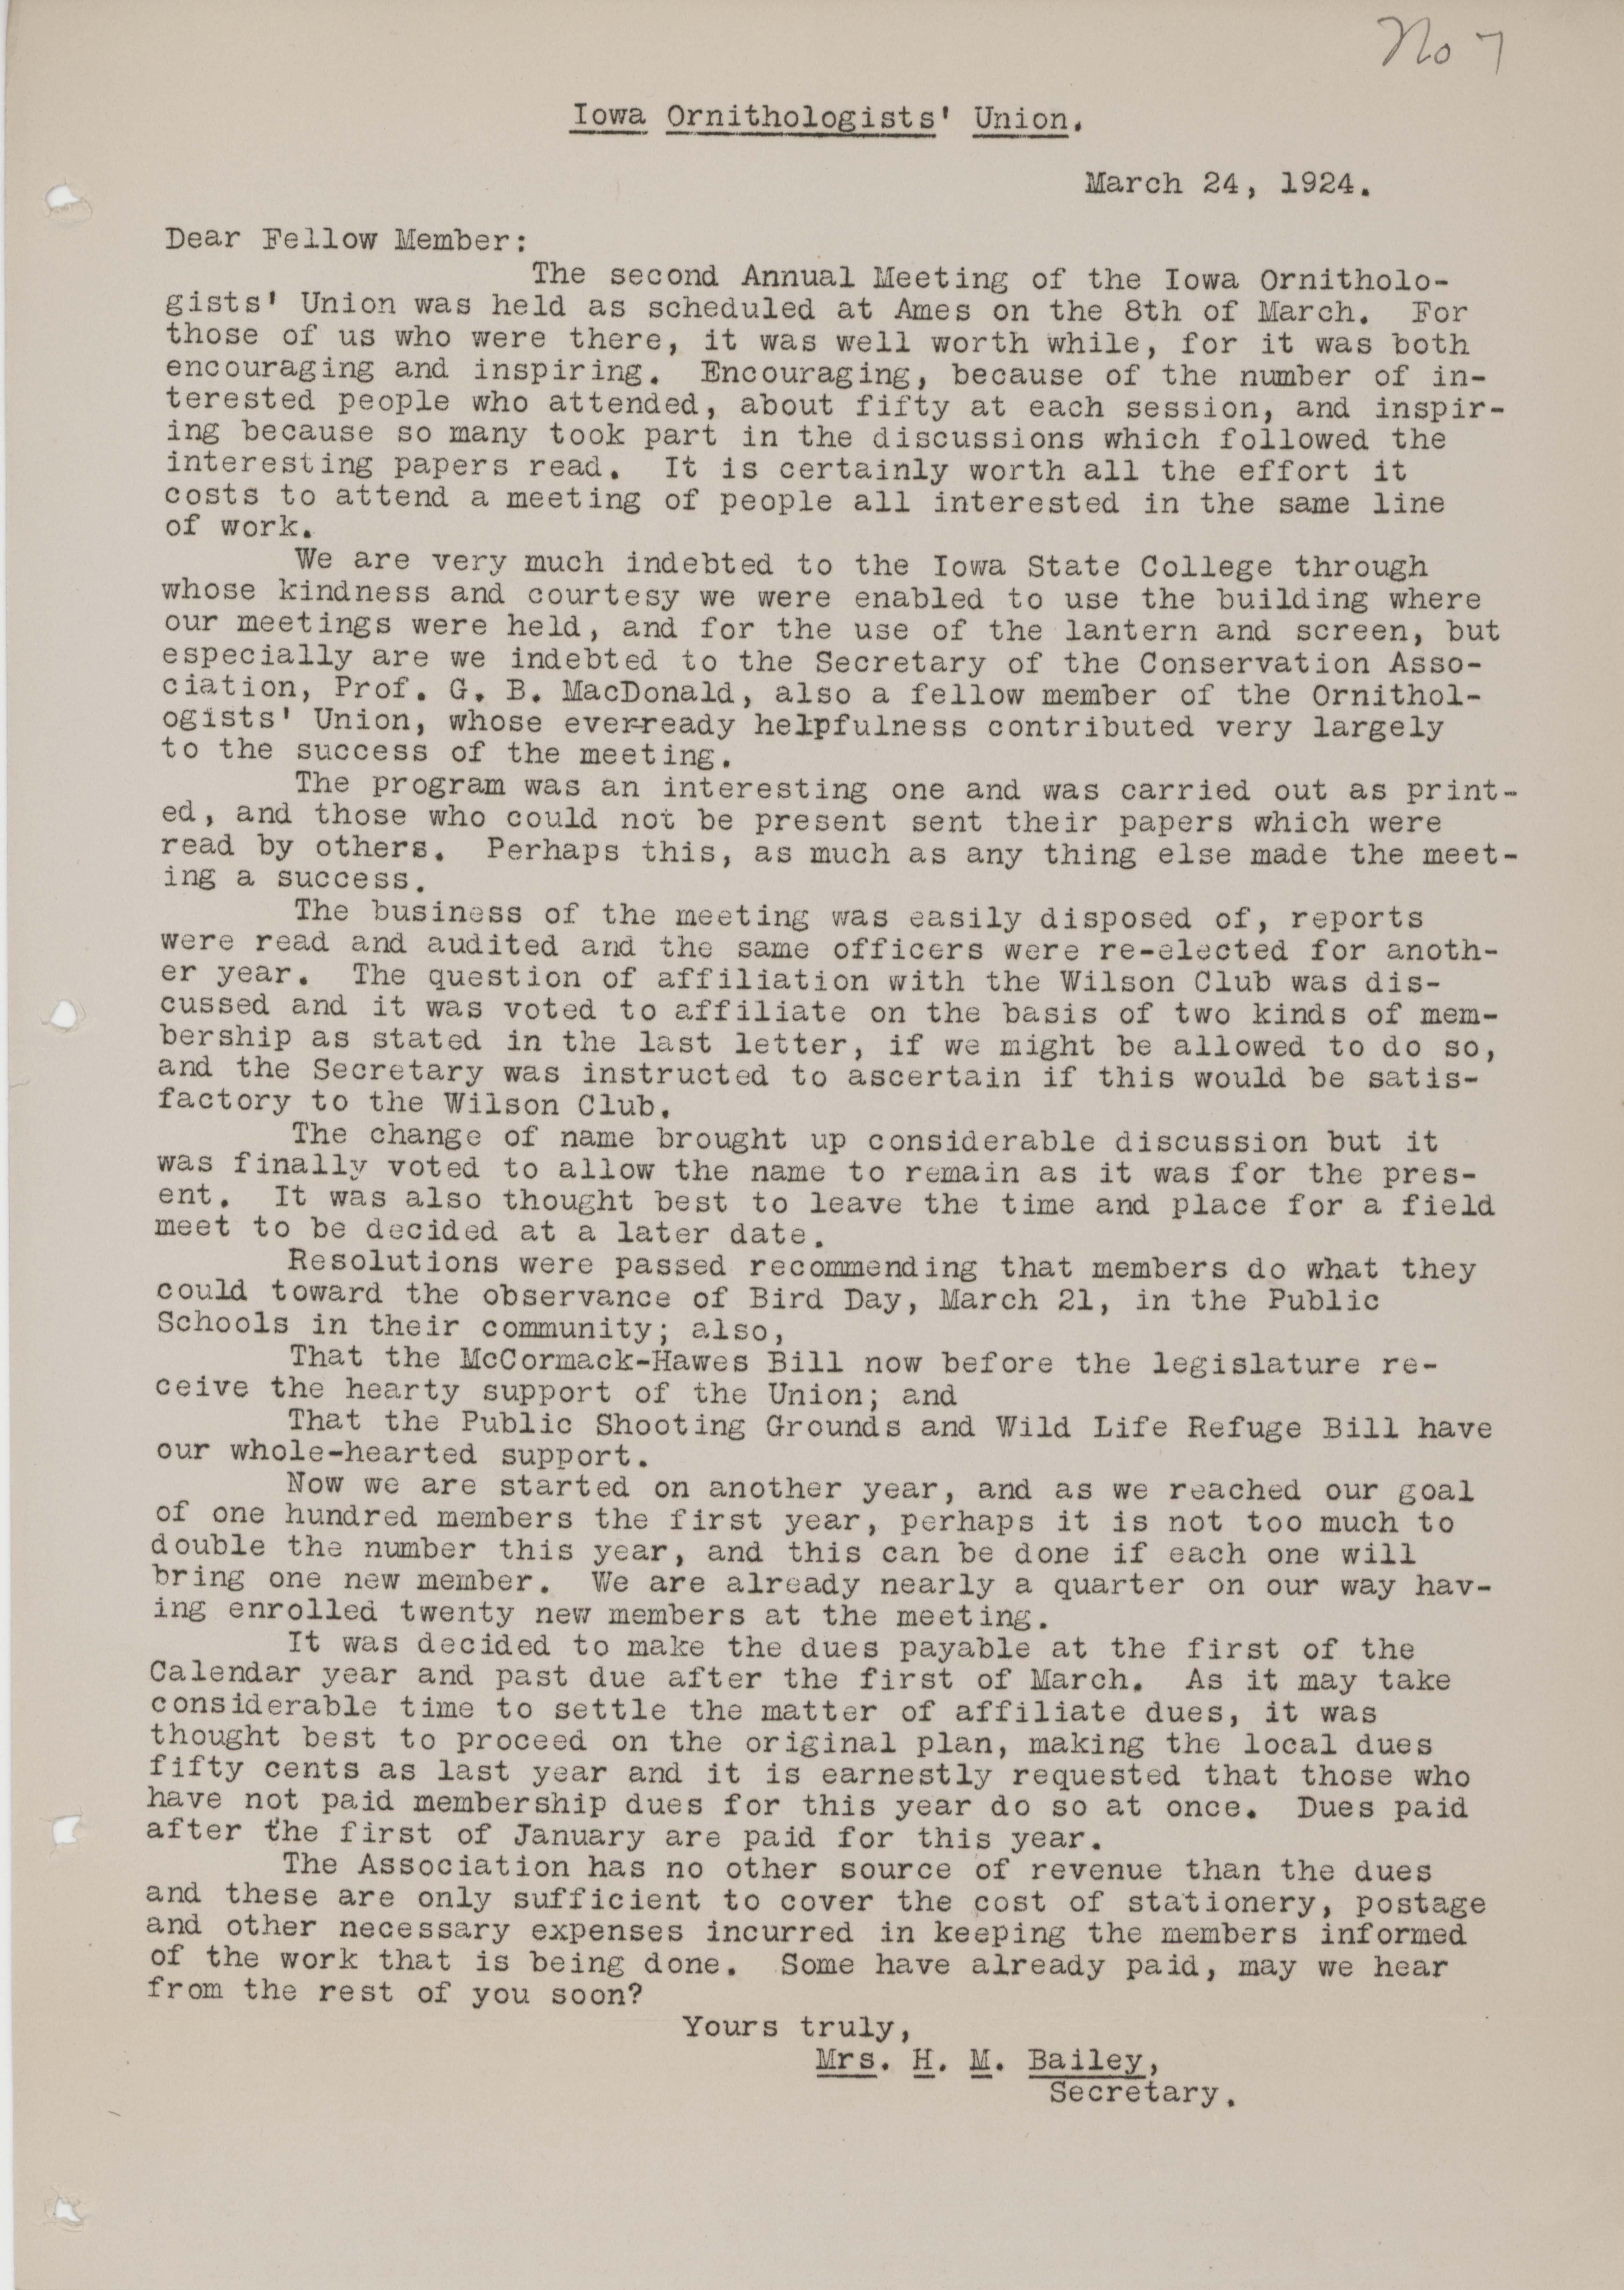 Letter to members of the Iowa Ornithologists' Union regarding the second annual meeting, March 24, 1924